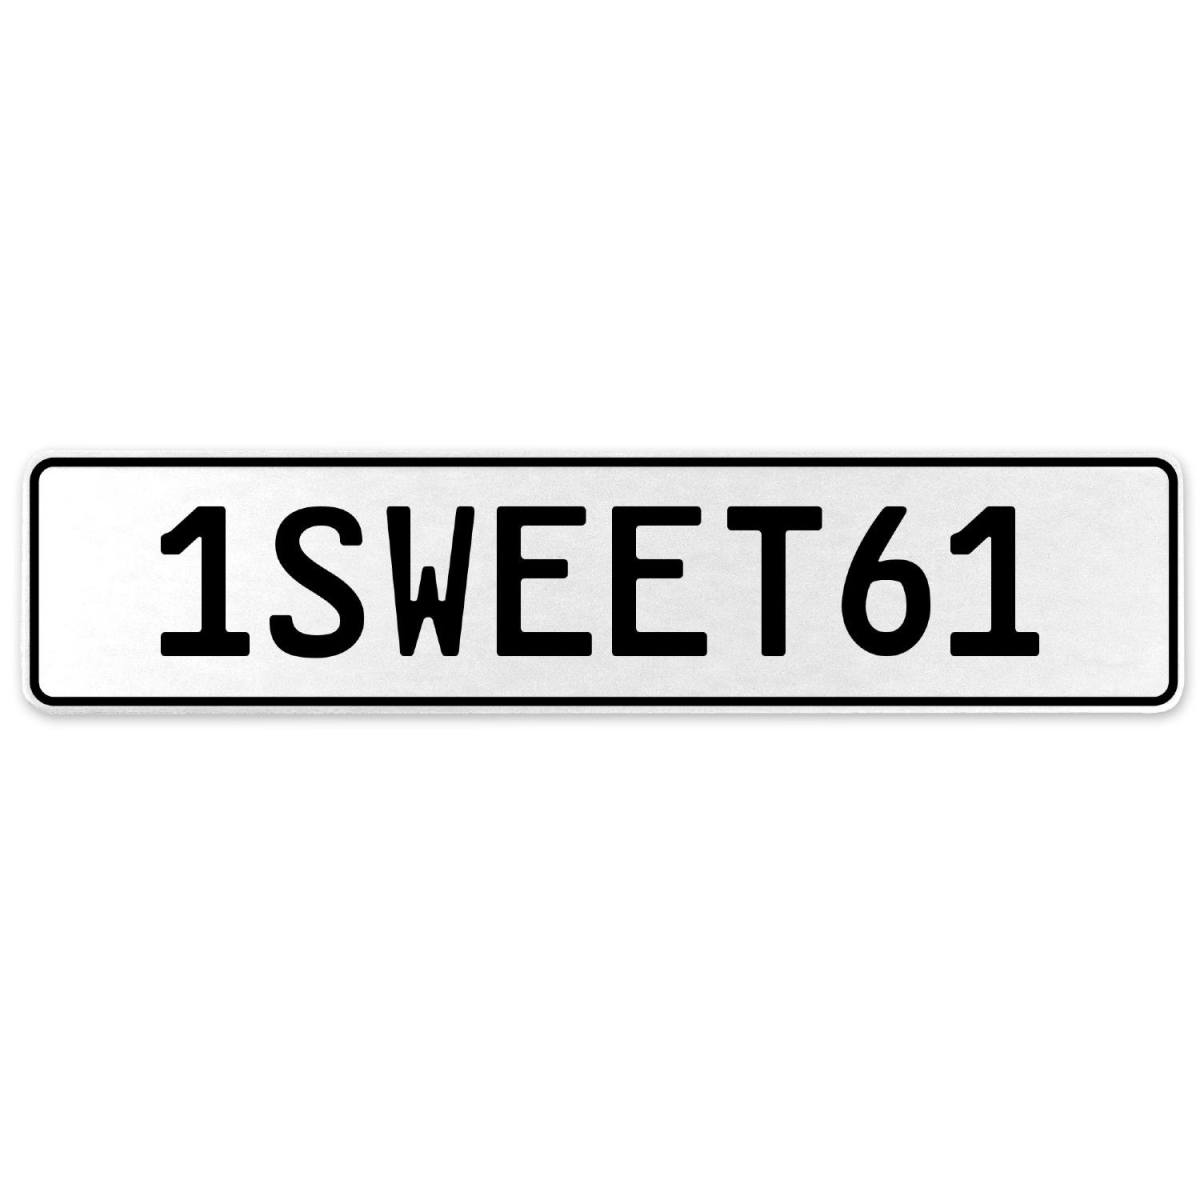 554262 1sweet61 - White Aluminum Street Sign Mancave Euro Plate Name Door Sign Wall